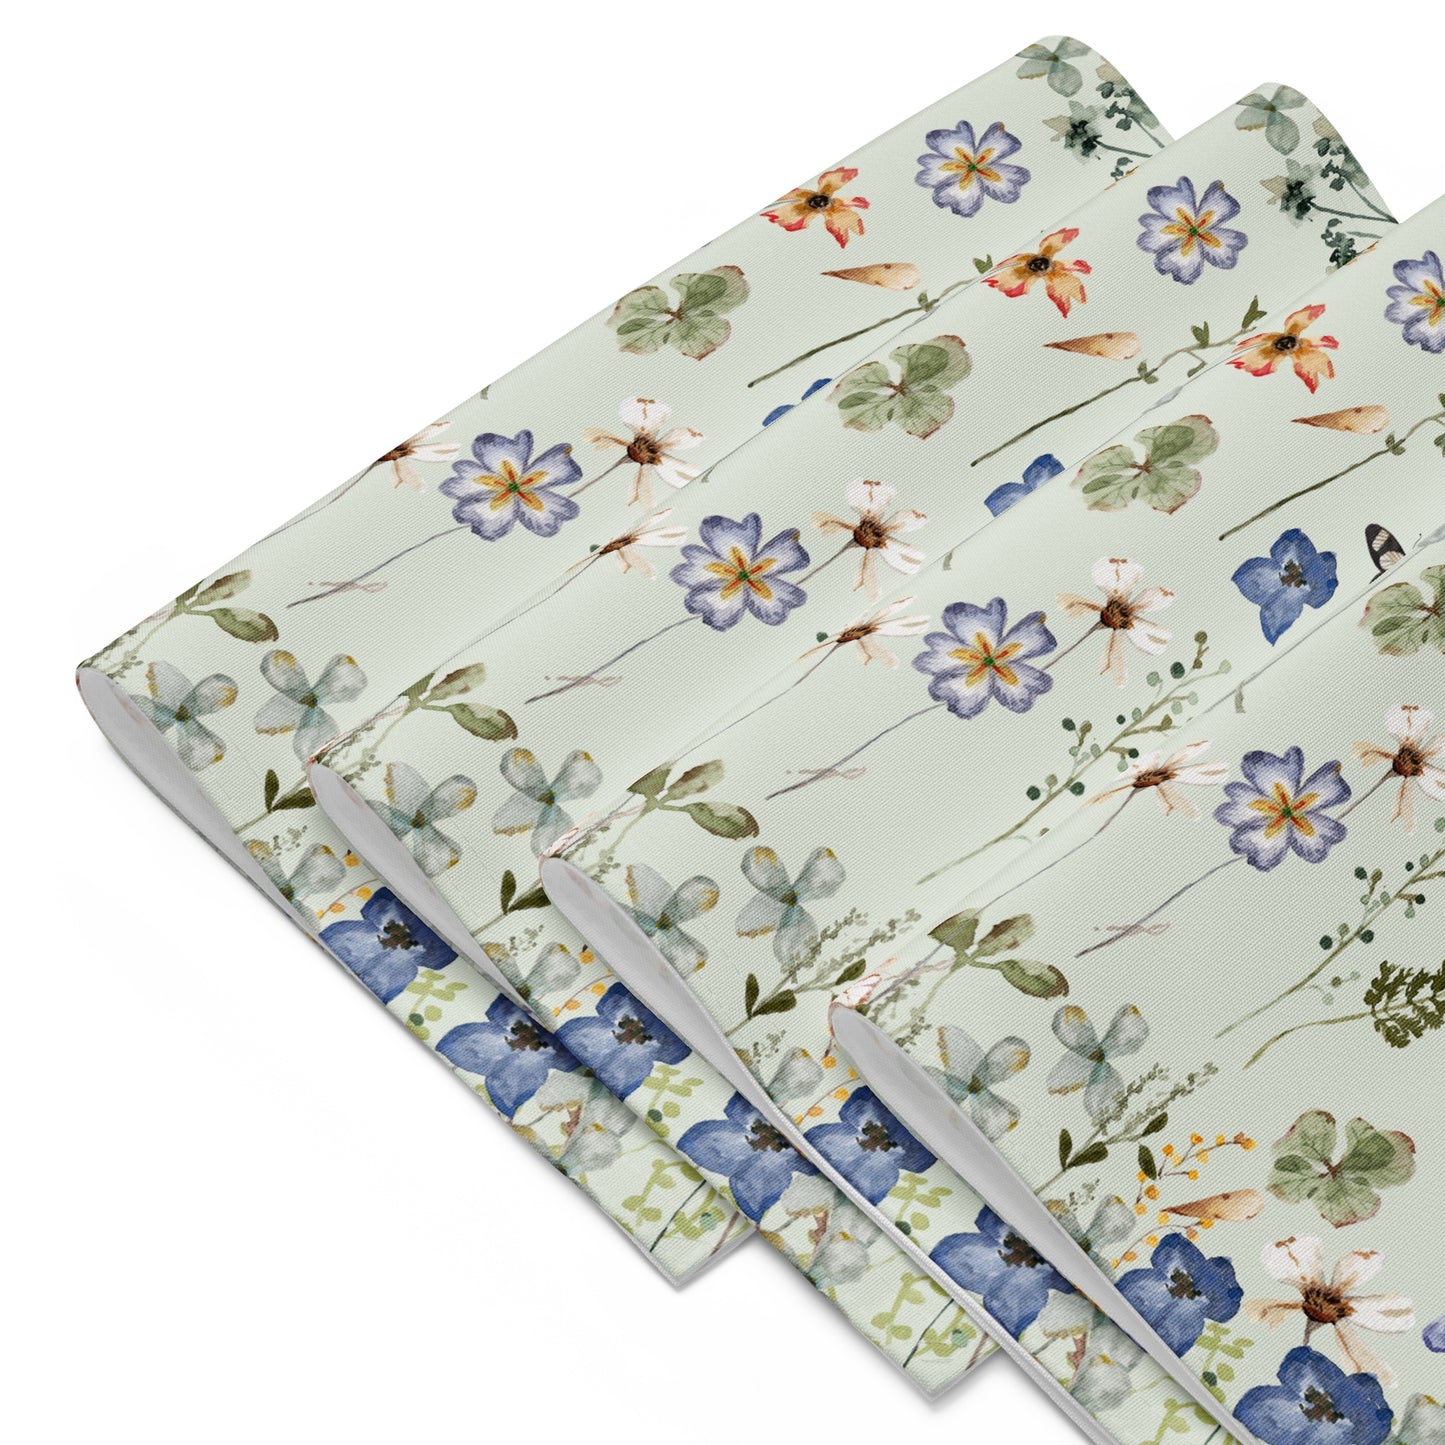 Wildflowers Floral PLACEMAT set - green Tone from BLUE WATER SONGS